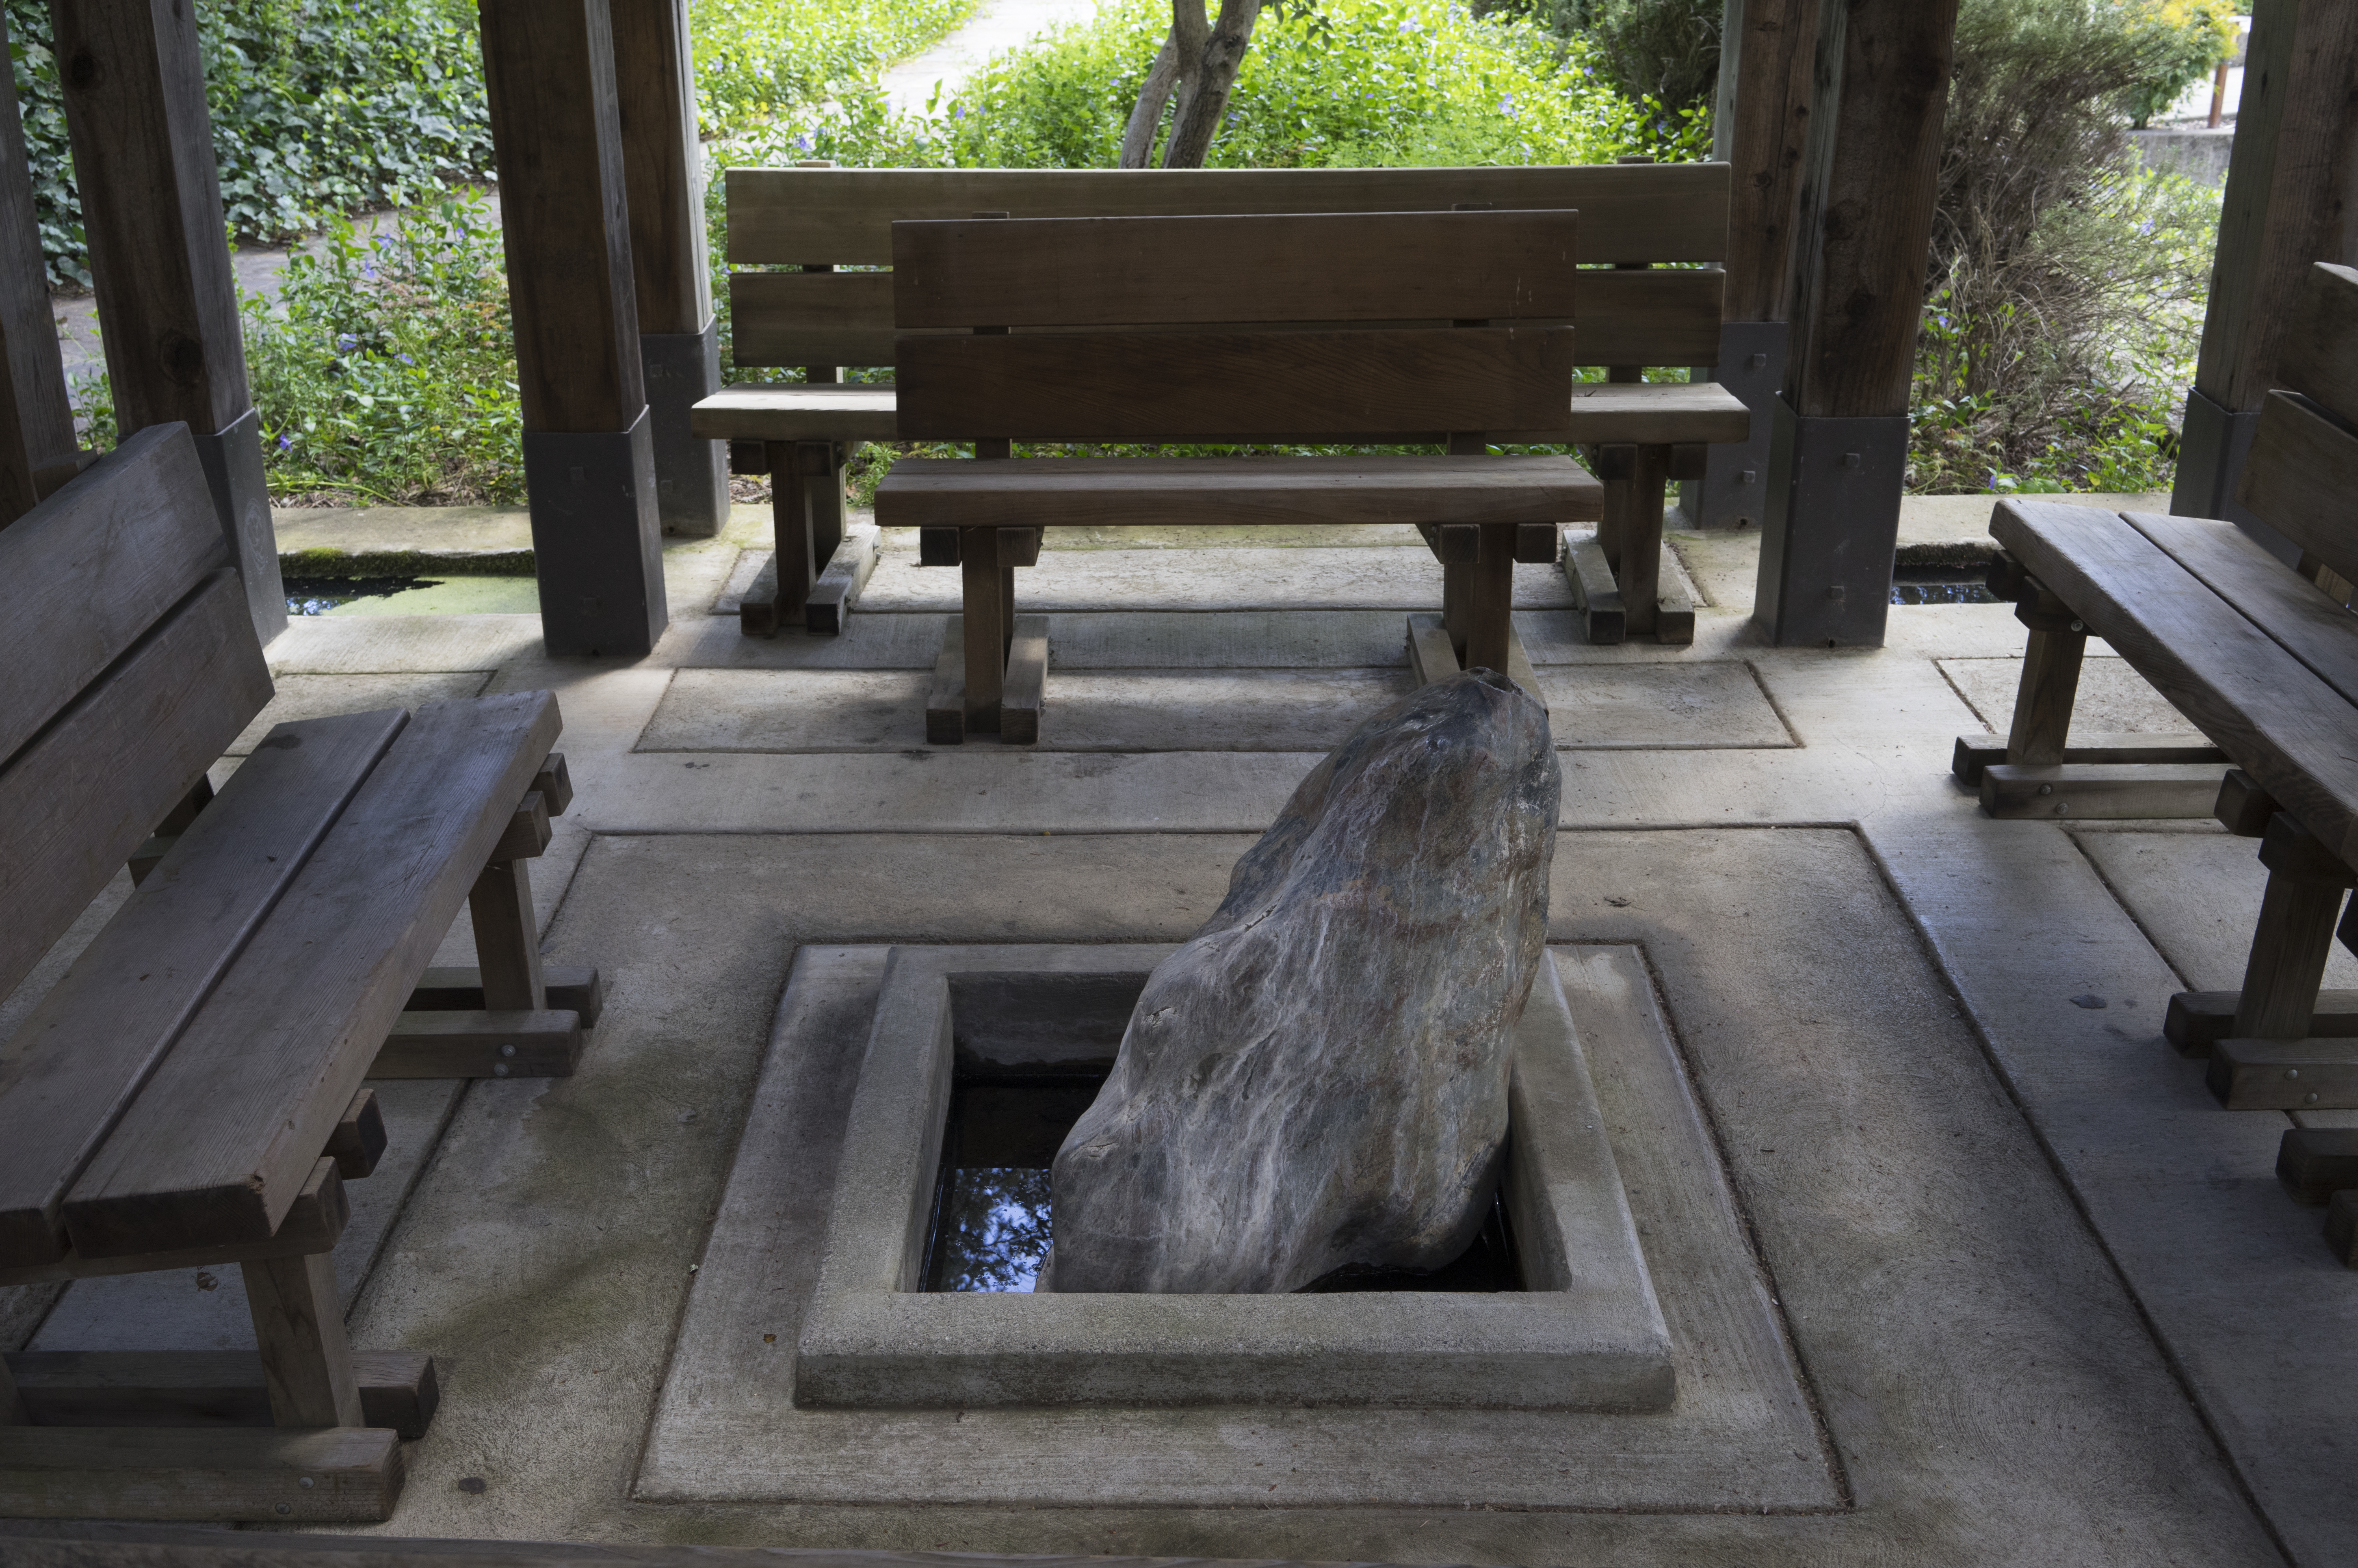 a rock in a square hole in a concrete area with benches